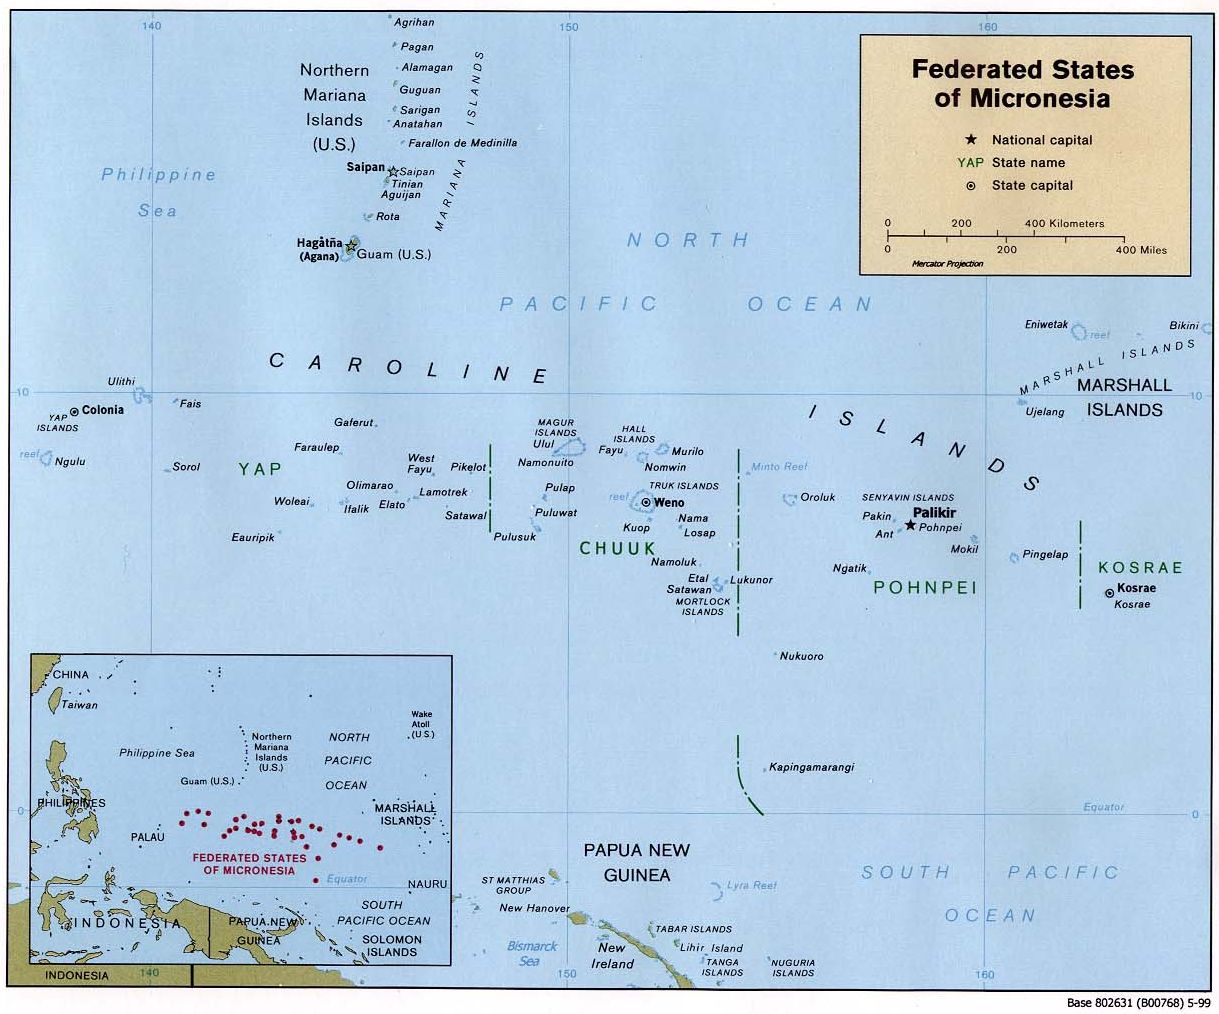 Map of the Federated States of Micronesia (Political), 1999. Courtesy of, The World Factbook (http://cia.gov/cia/publications/factbook) or CIA Maps and Publications Released to the Public (http://www.cia.gov/cia/publications/mapspub), Central Intelligence Agency (CIA), Government of the United States of America (USA); and the Perry-Castaeda Map Collection (http://www.lib.utexas.edu/maps), Perry-Castaeda Library, The General Libraries, University of Texas at Austin, Austin, Texas, USA.